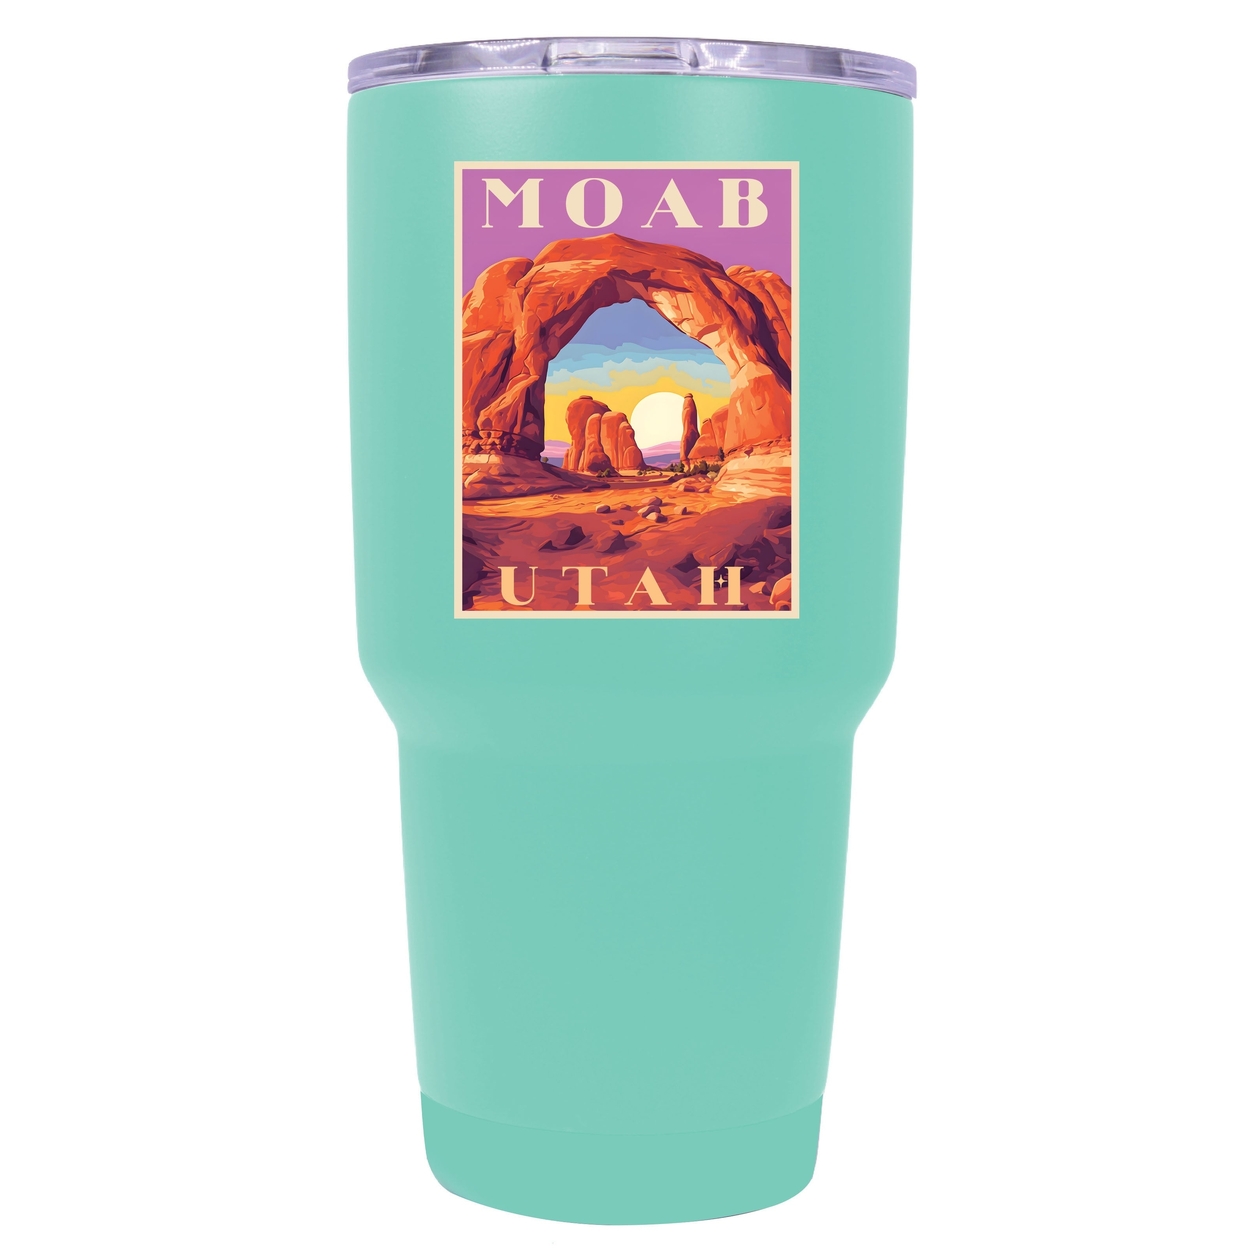 Moab Utah Souvenir 24 Oz Insulated Stainless Steel Tumbler - Stainless Steel,,4-Pack